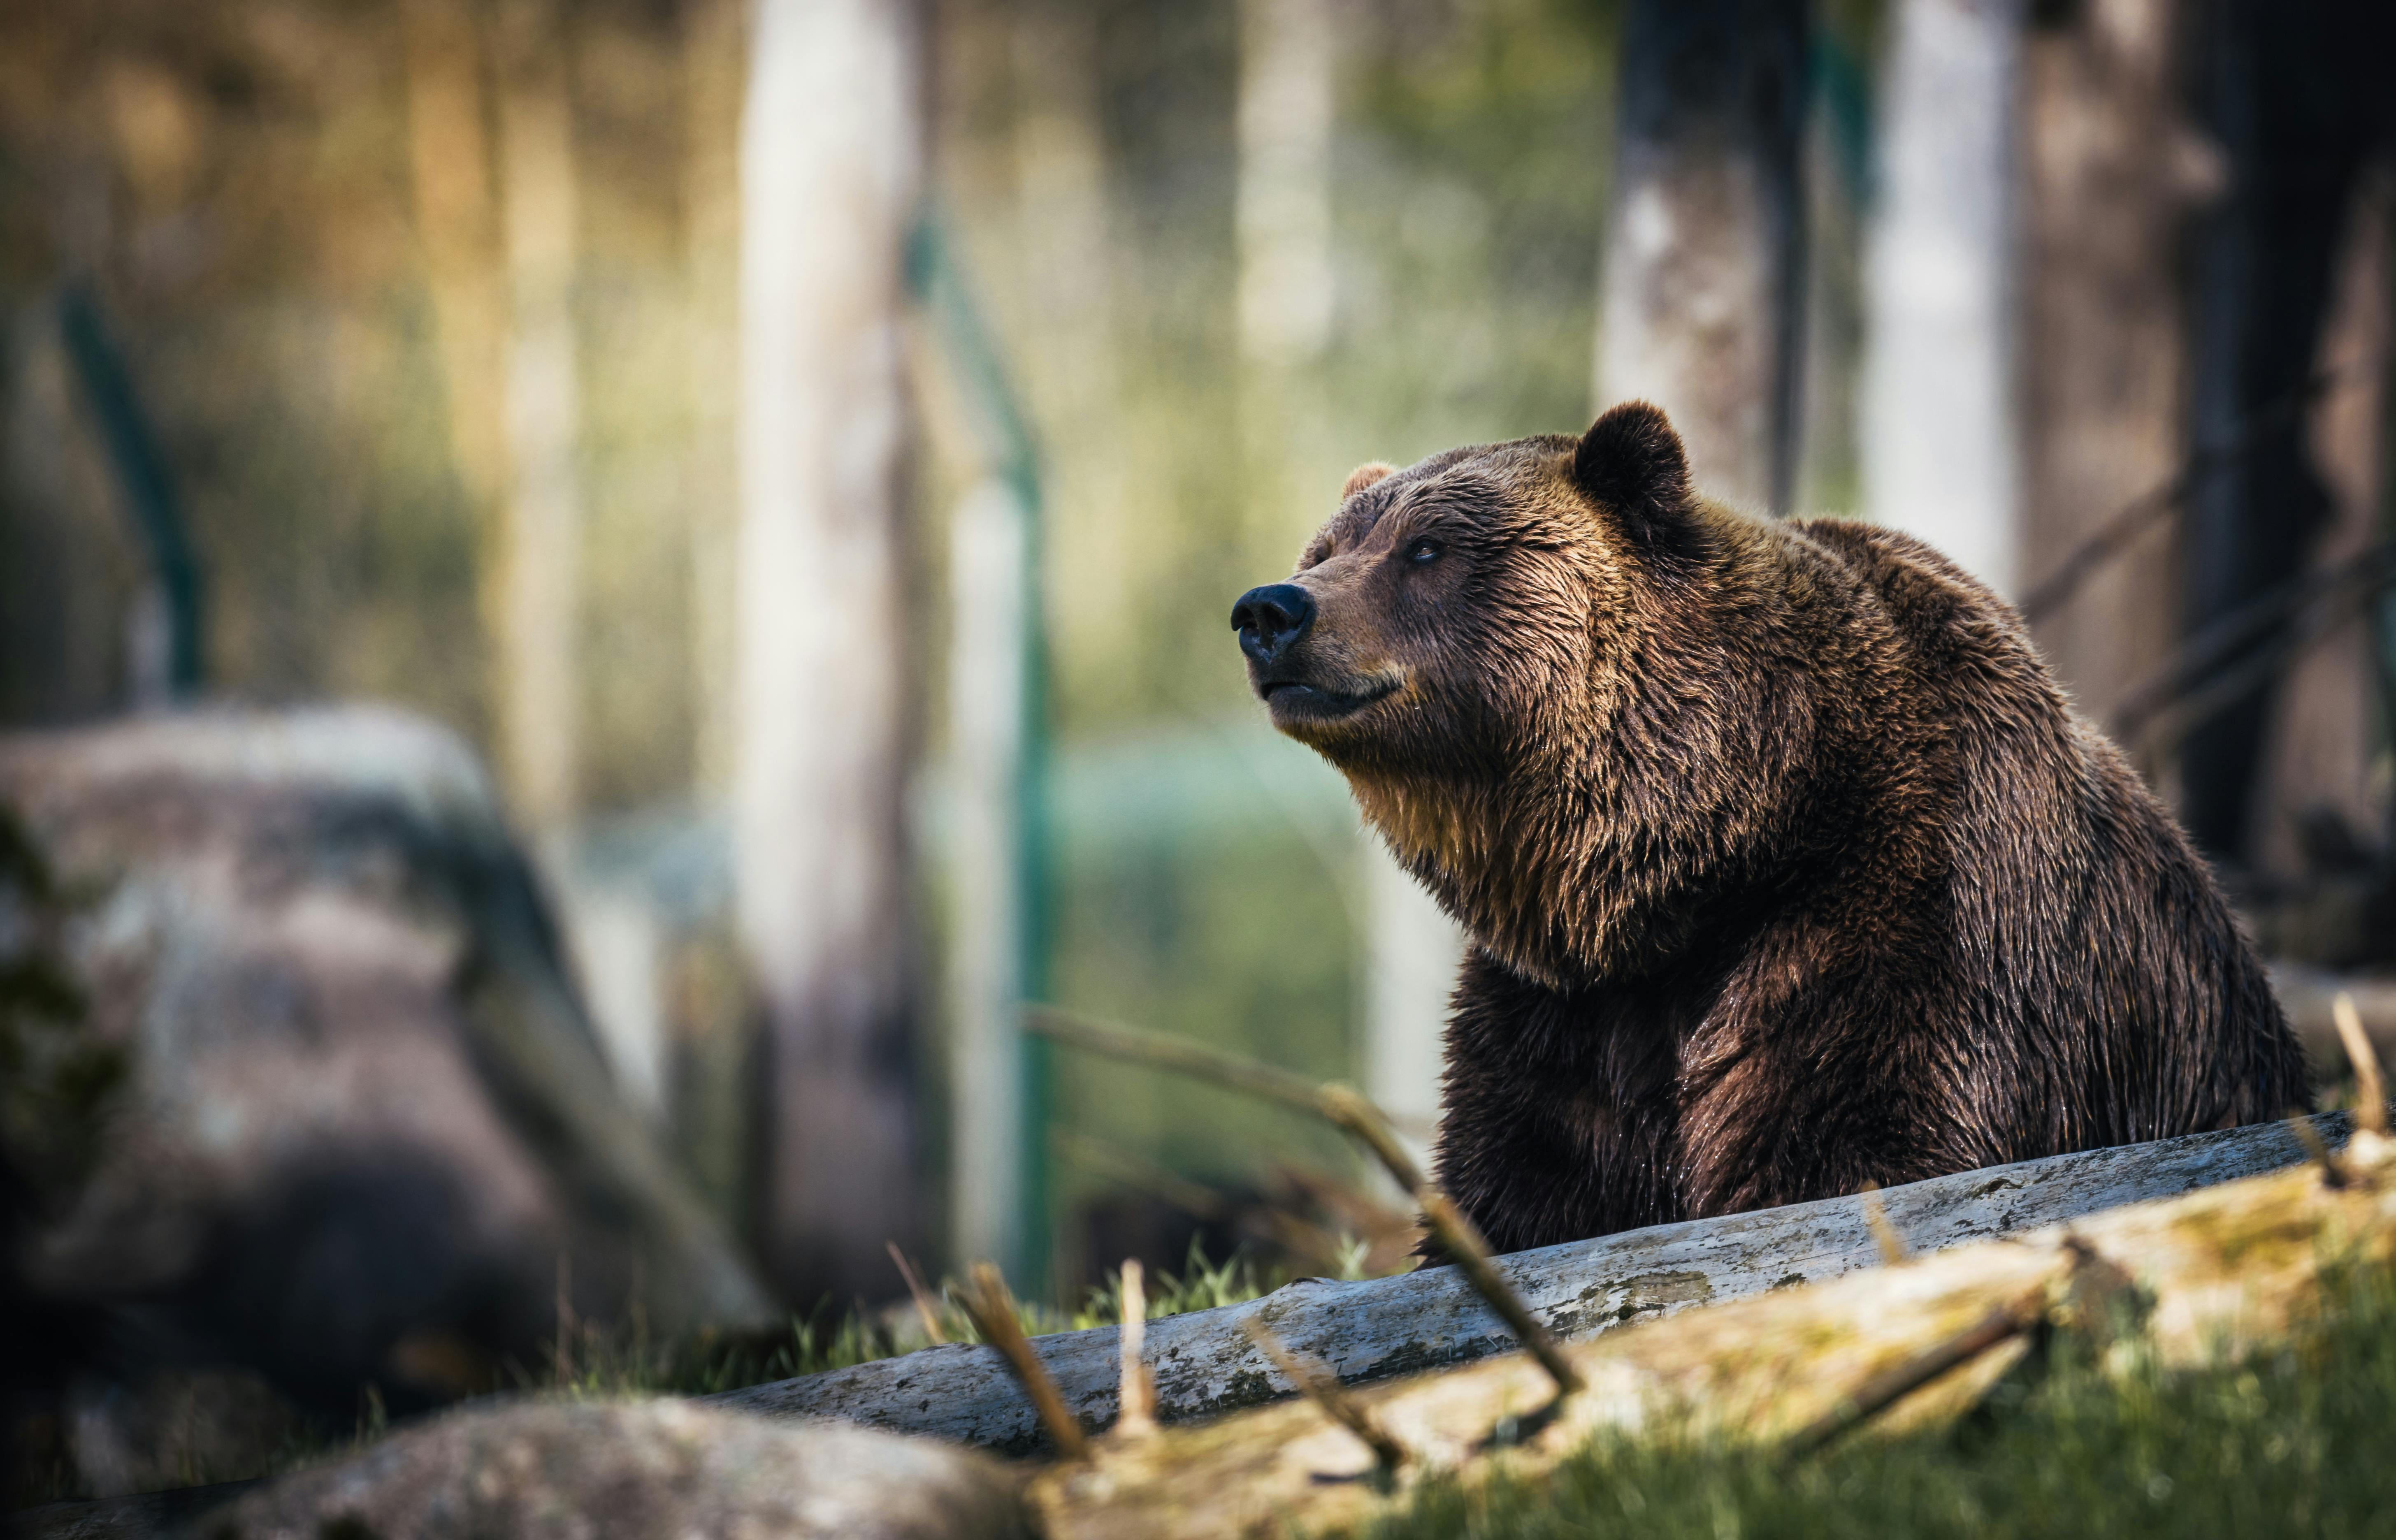 A bear in the forest. | Photo: Pexels